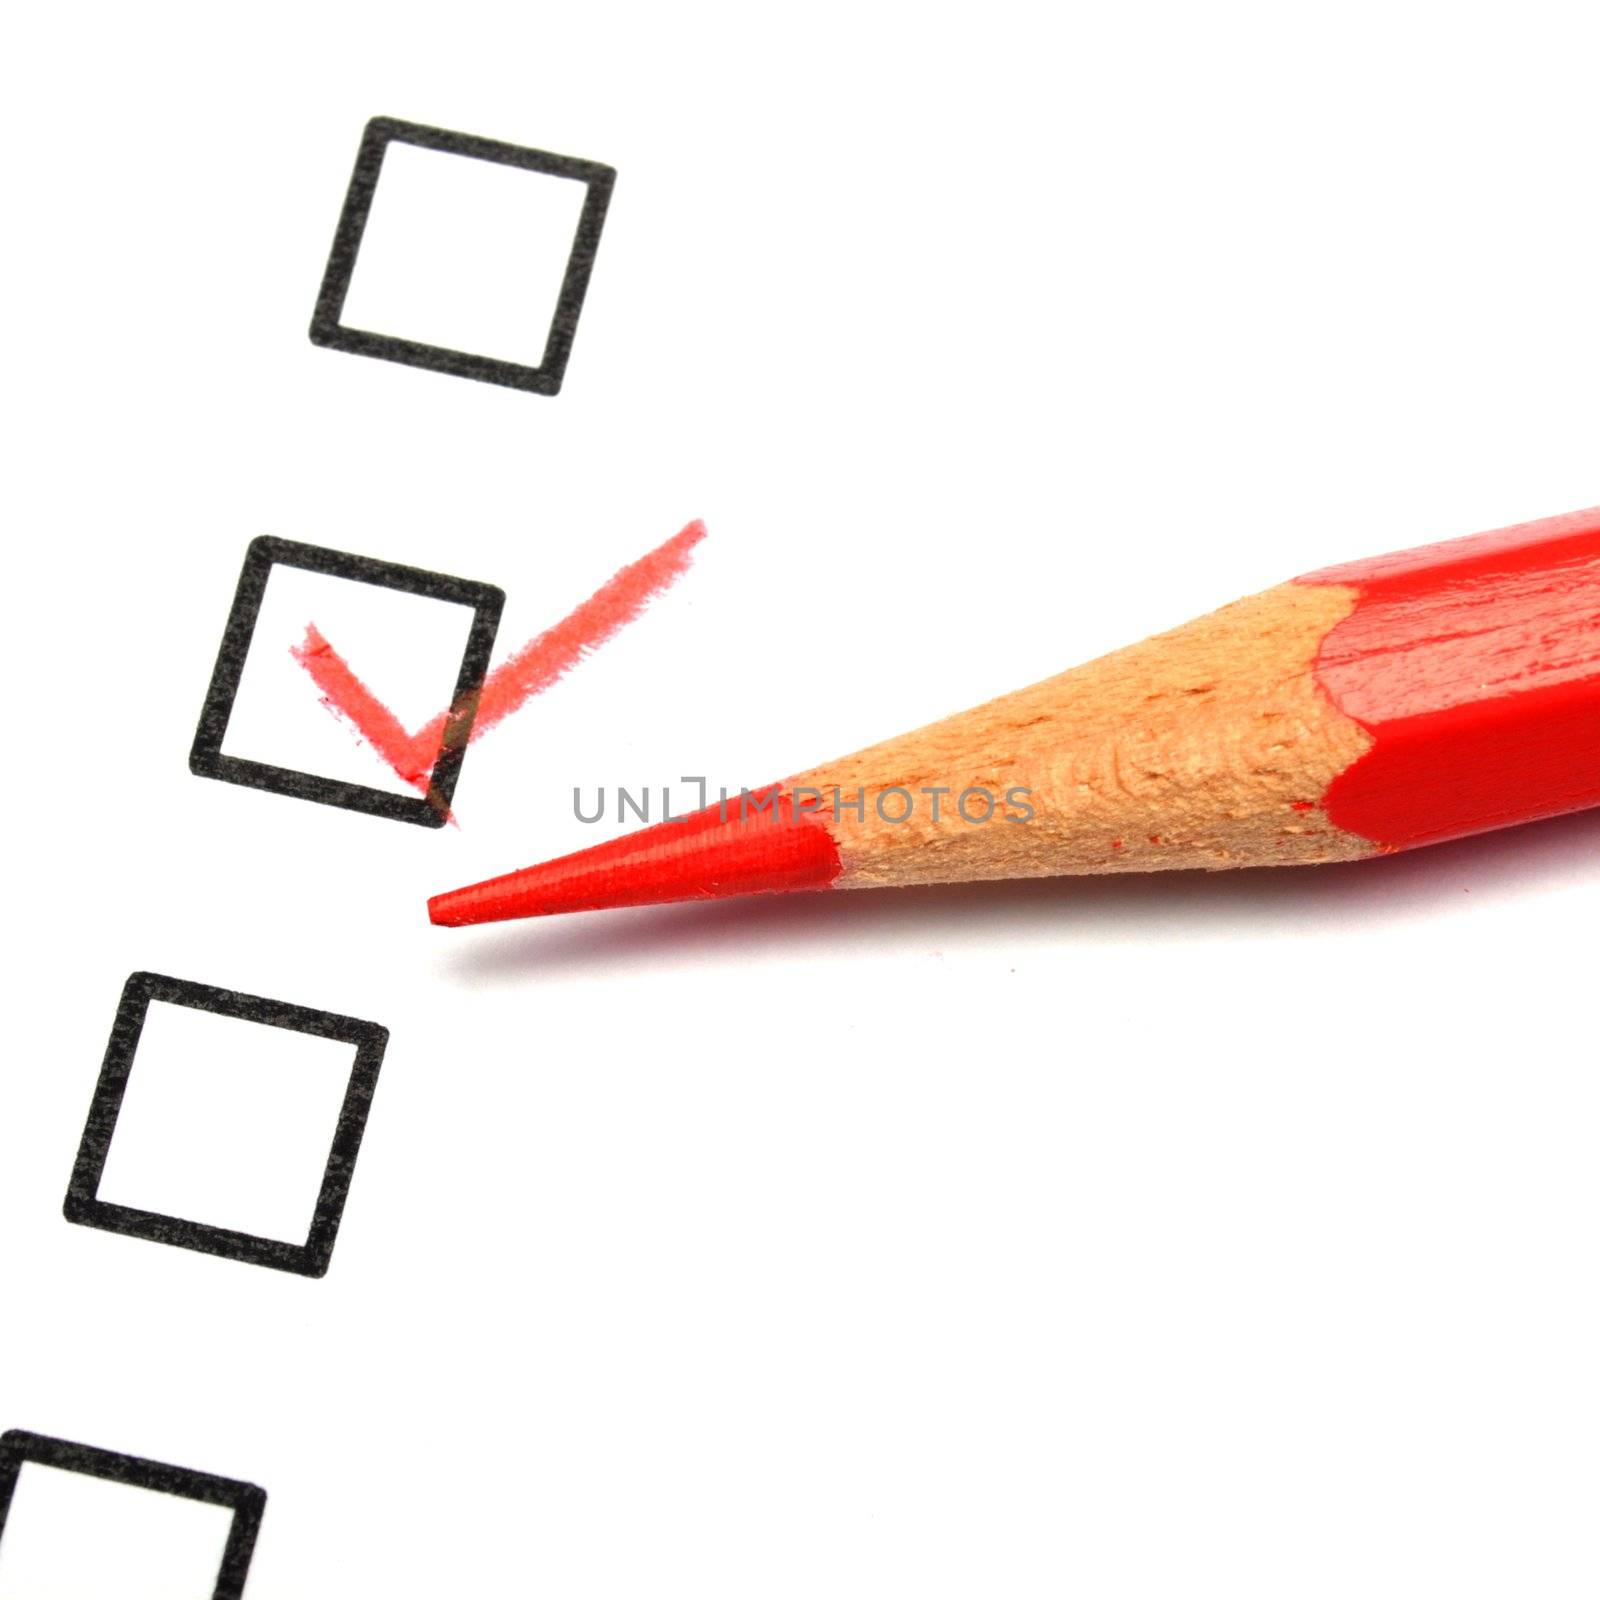 quality survey form with red pencil showing marketing concept